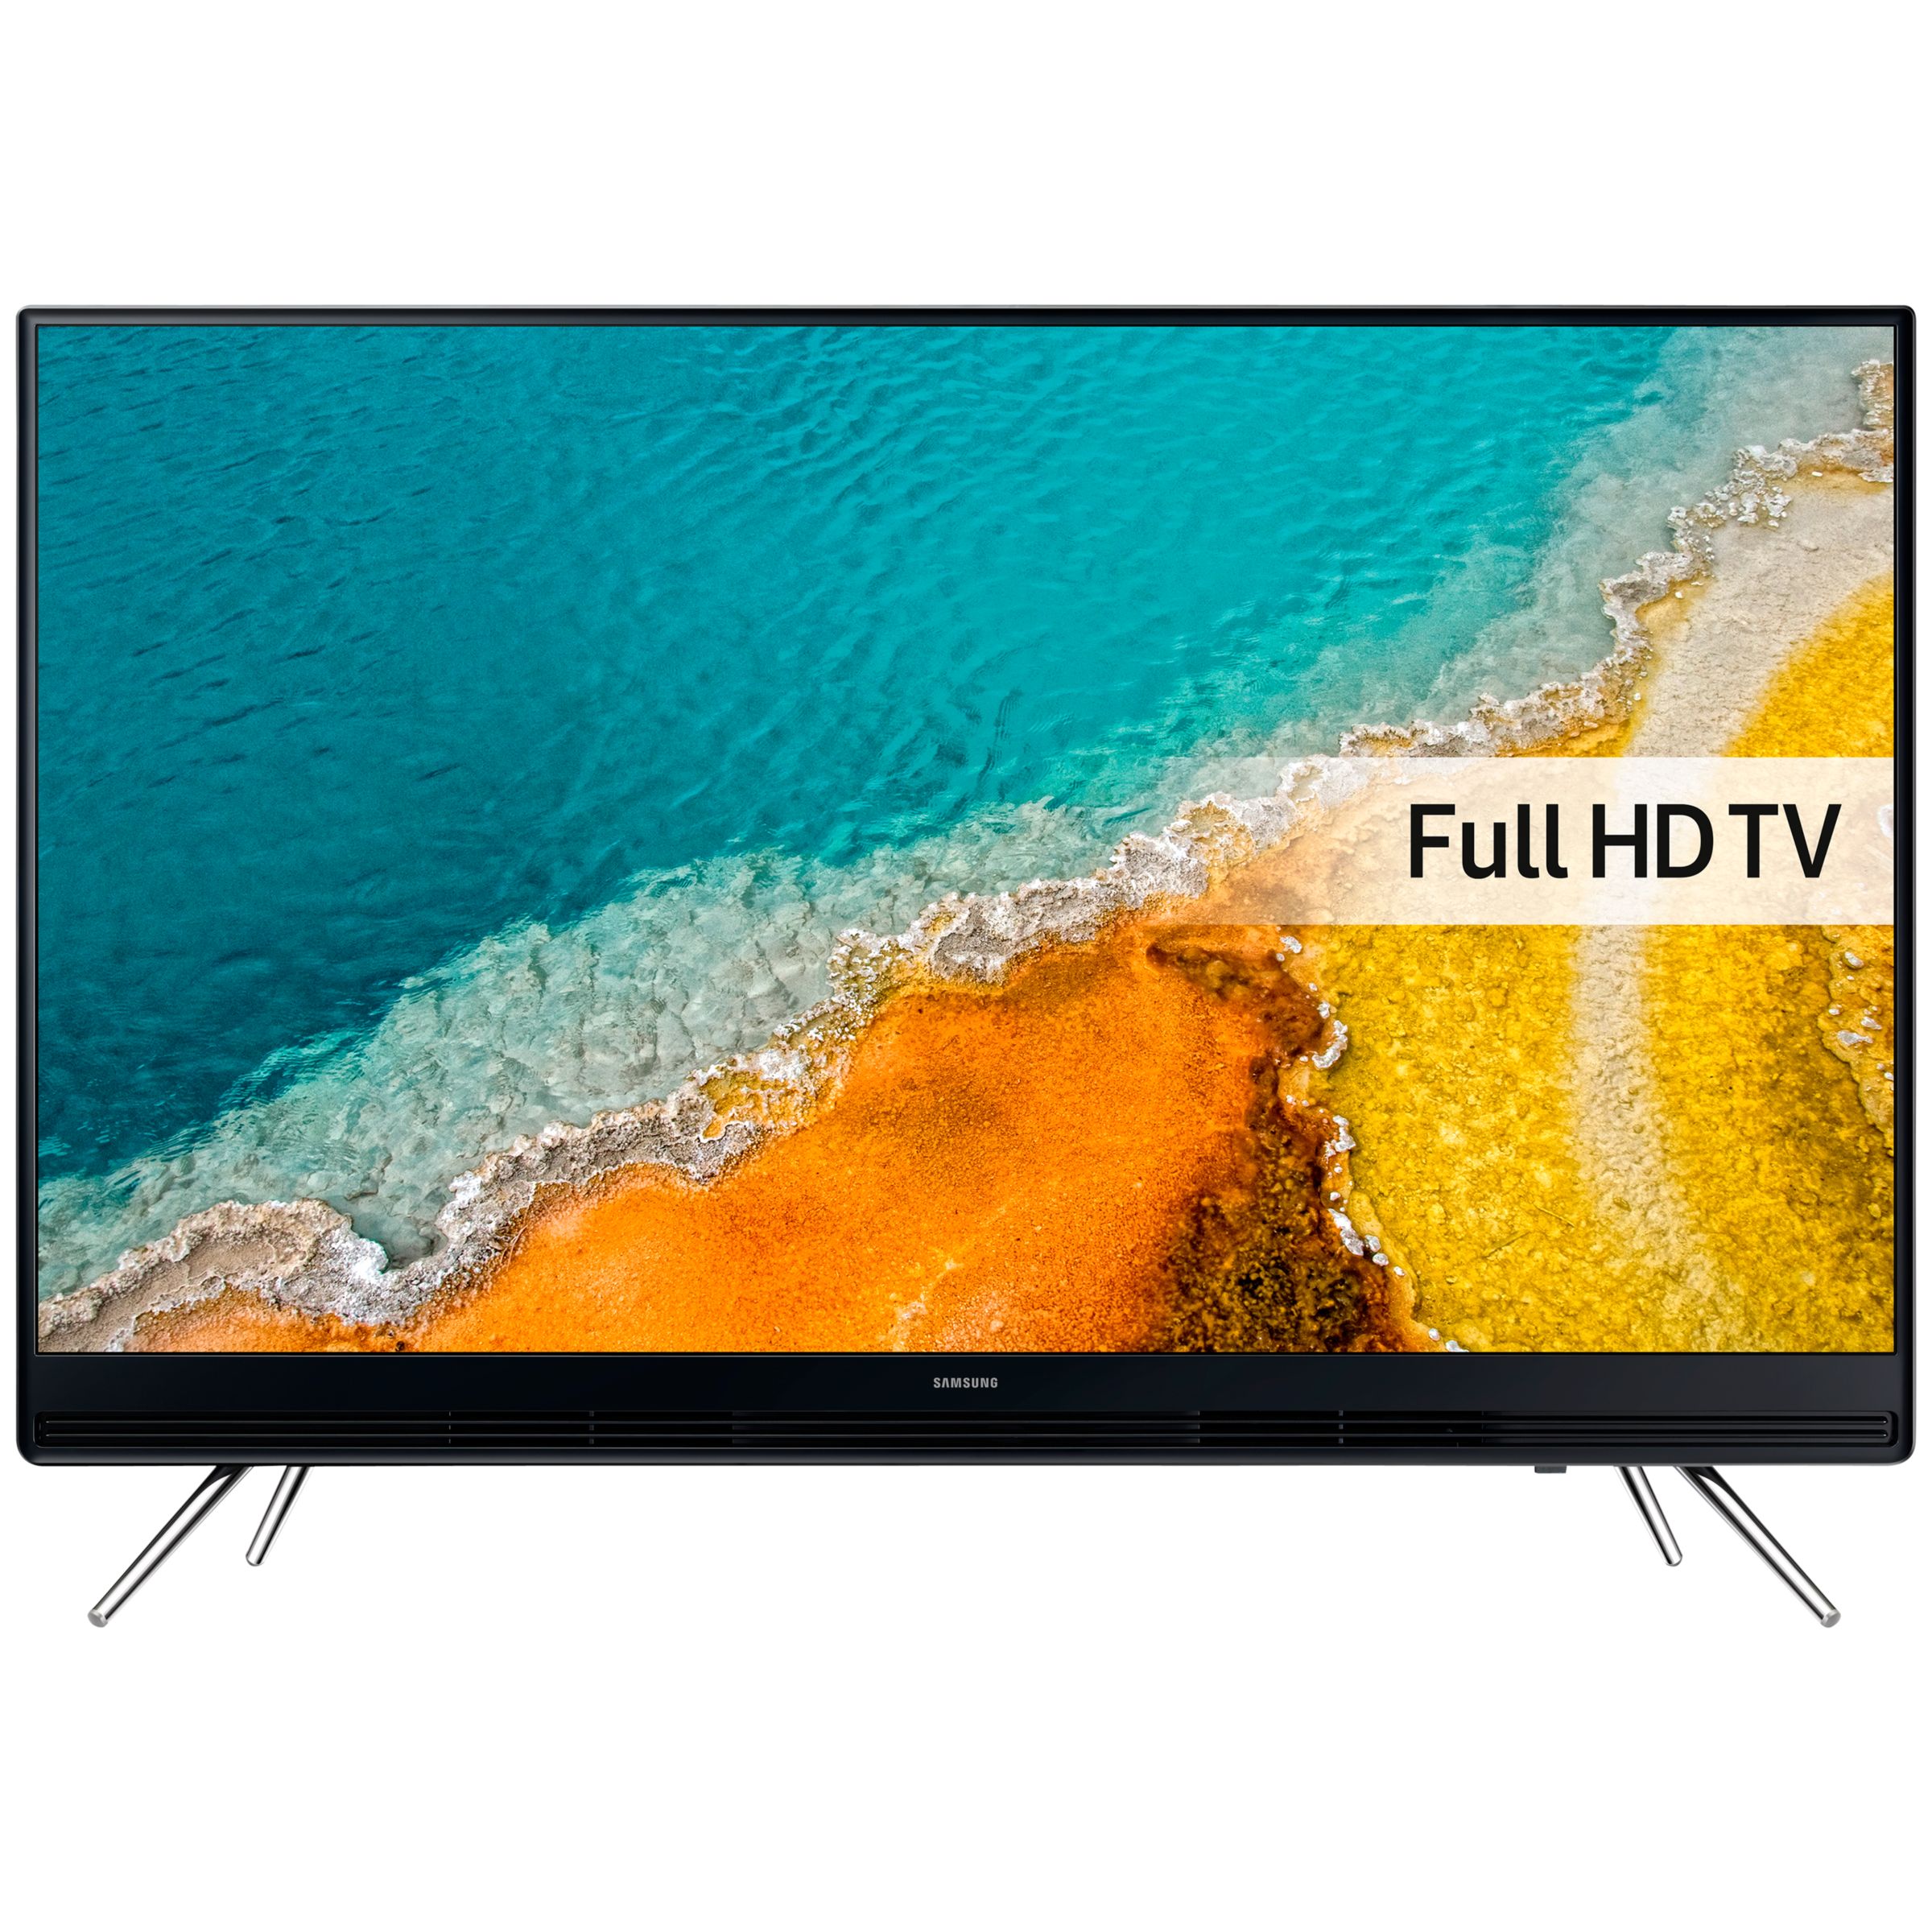 Samsung UE32K5100 LED Full HD 1080p TV, 32" with Freeview HD & Joiiii Design